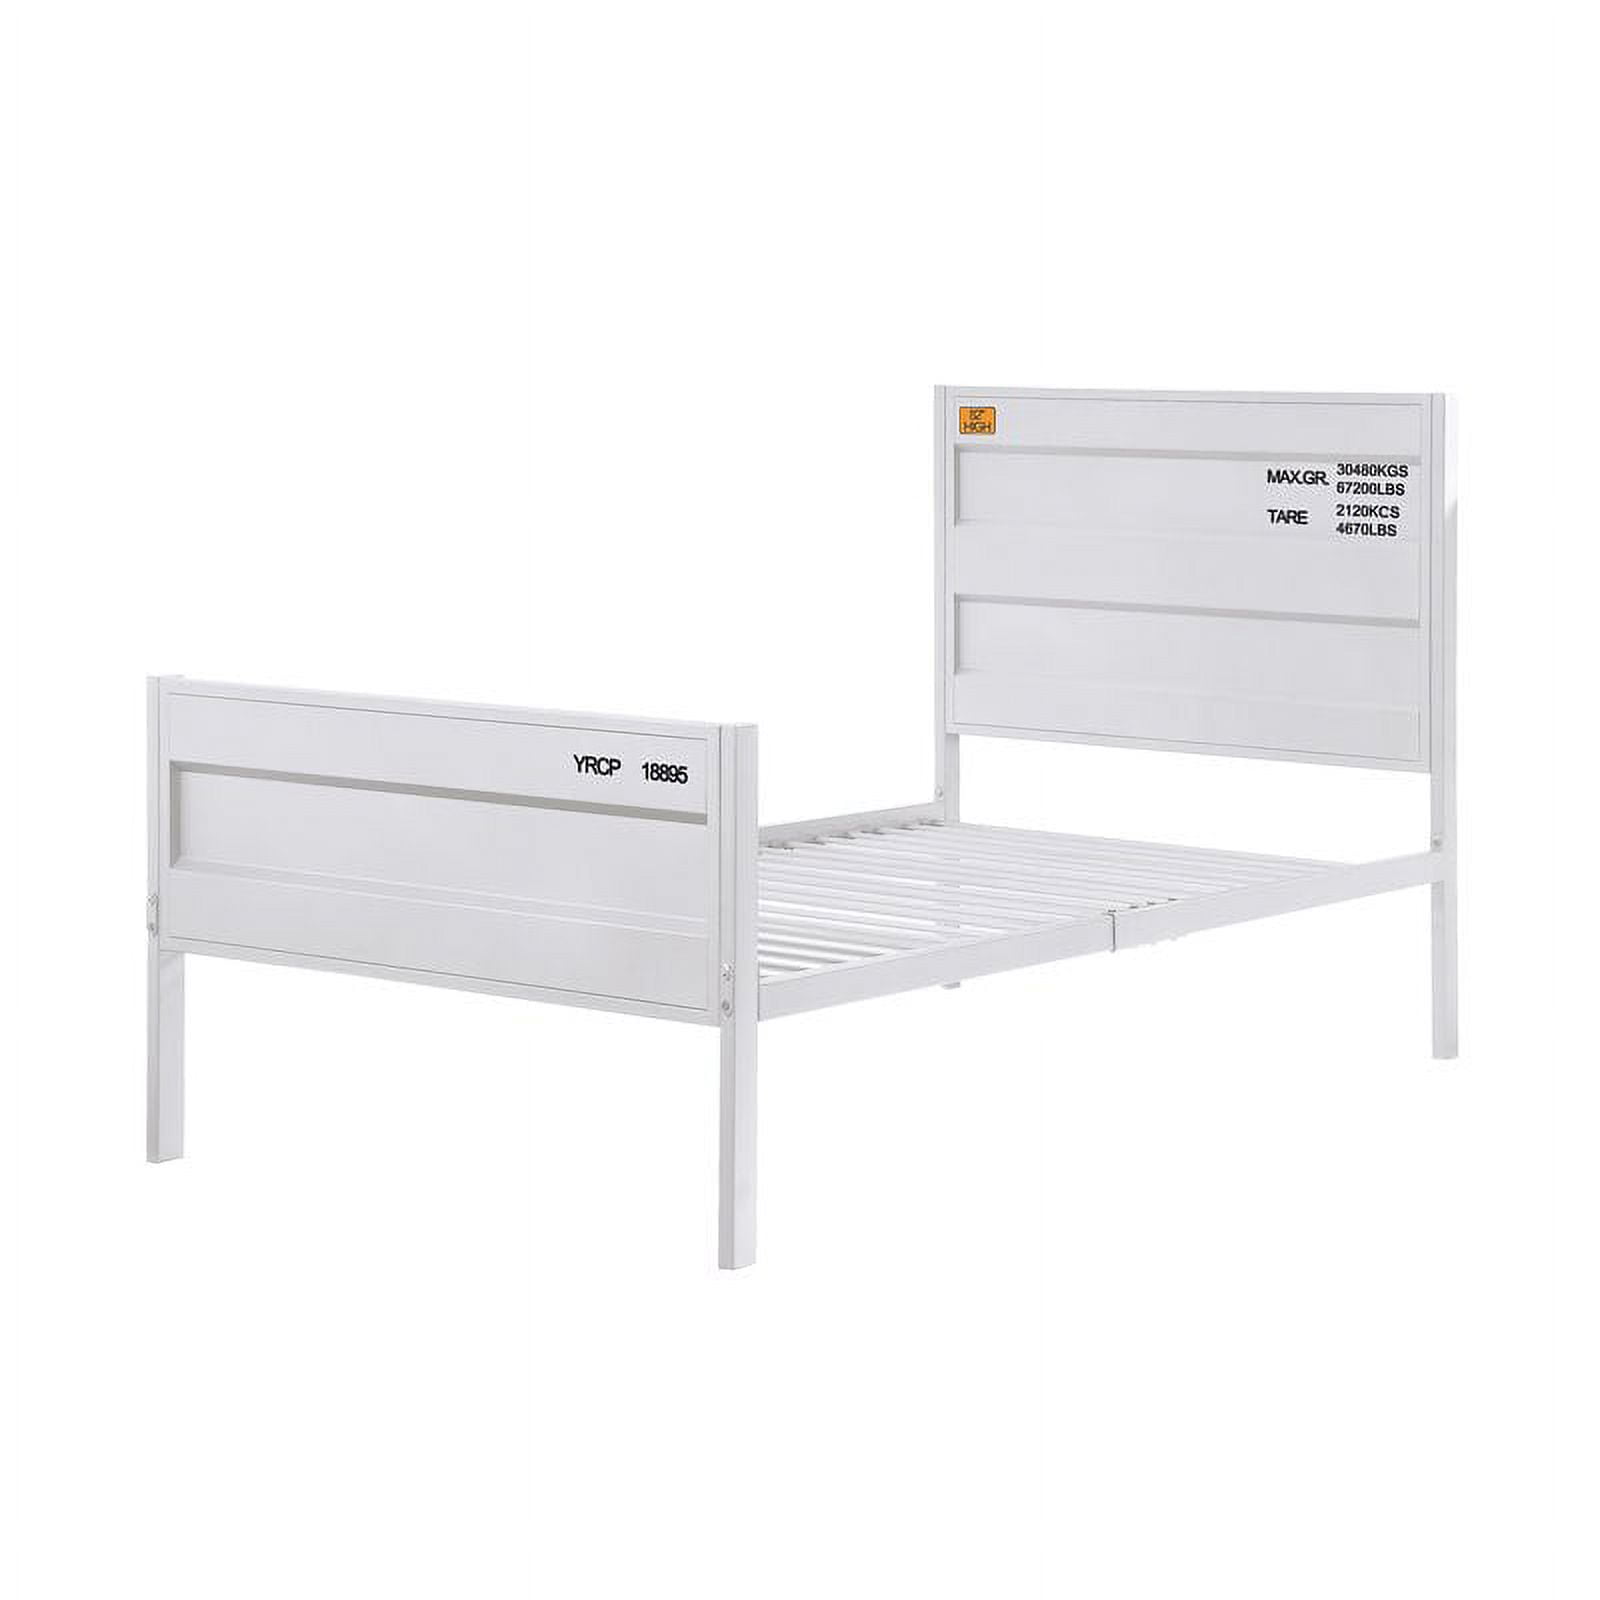 Picture of ACME Furniture 35900T 79 x 41 x 44 in. Cargo Bed, White - Twin Size